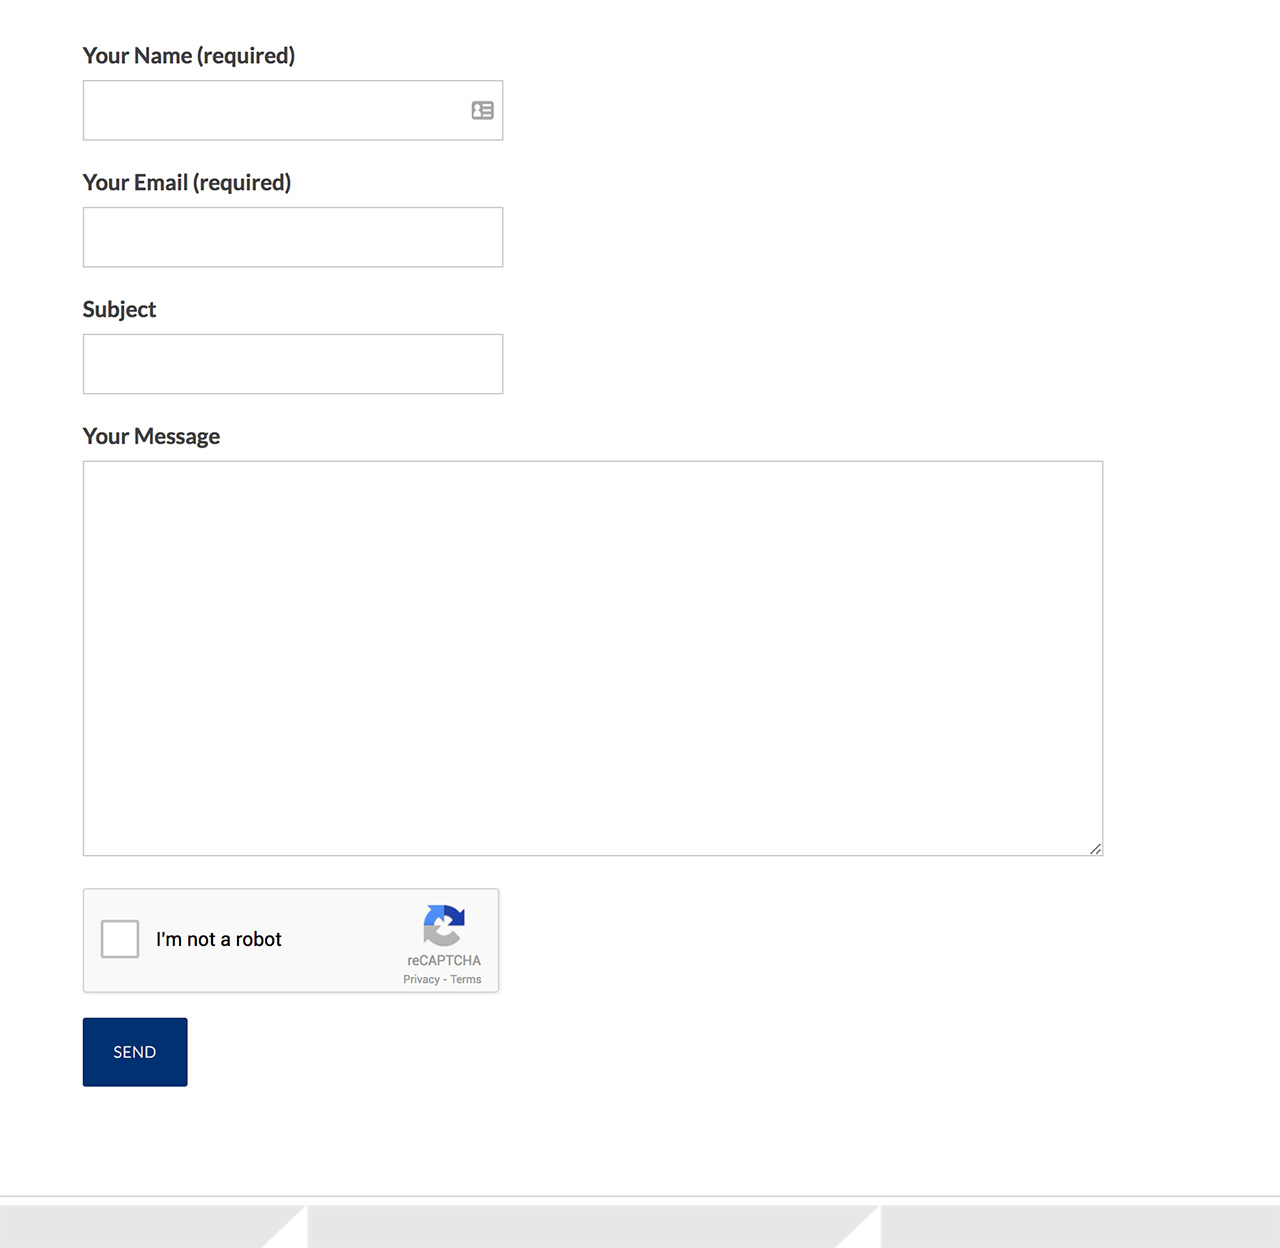 United Steelworkers Local 4-200: Custom Contact Forms